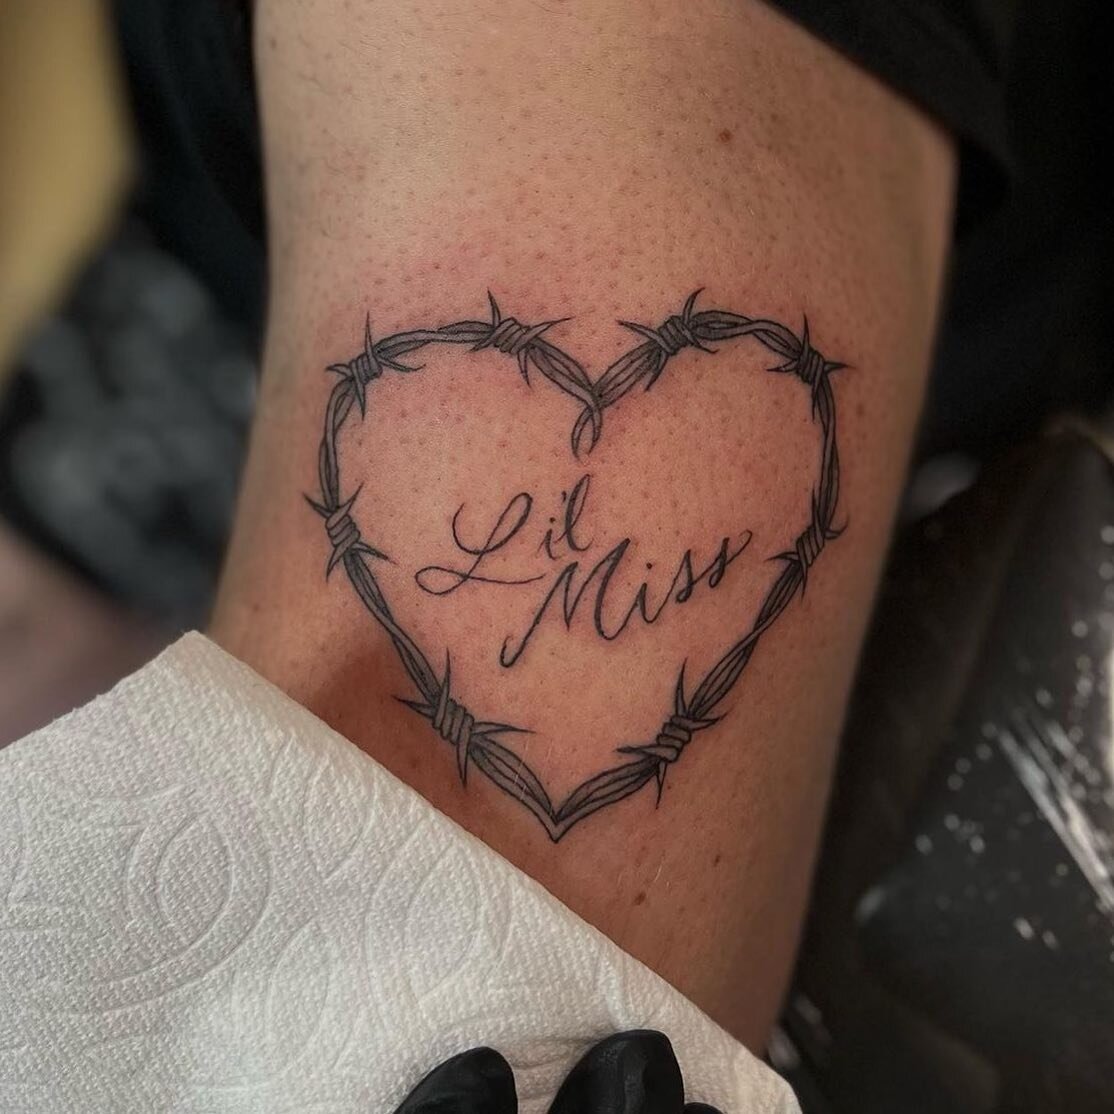 Cute one by @ashleybucquoy 
Contact her to get in her books! 

Dark Atelier Tattoo
Walk ins welcomed
🏰1115 Front St. in Old Sac
☎️(916)573-3225
.
.
.
.
.
.
.
.
.
.
.
#california #sacramento #sacramentotattooshop #sacramentotattoos #femaletattooer #t